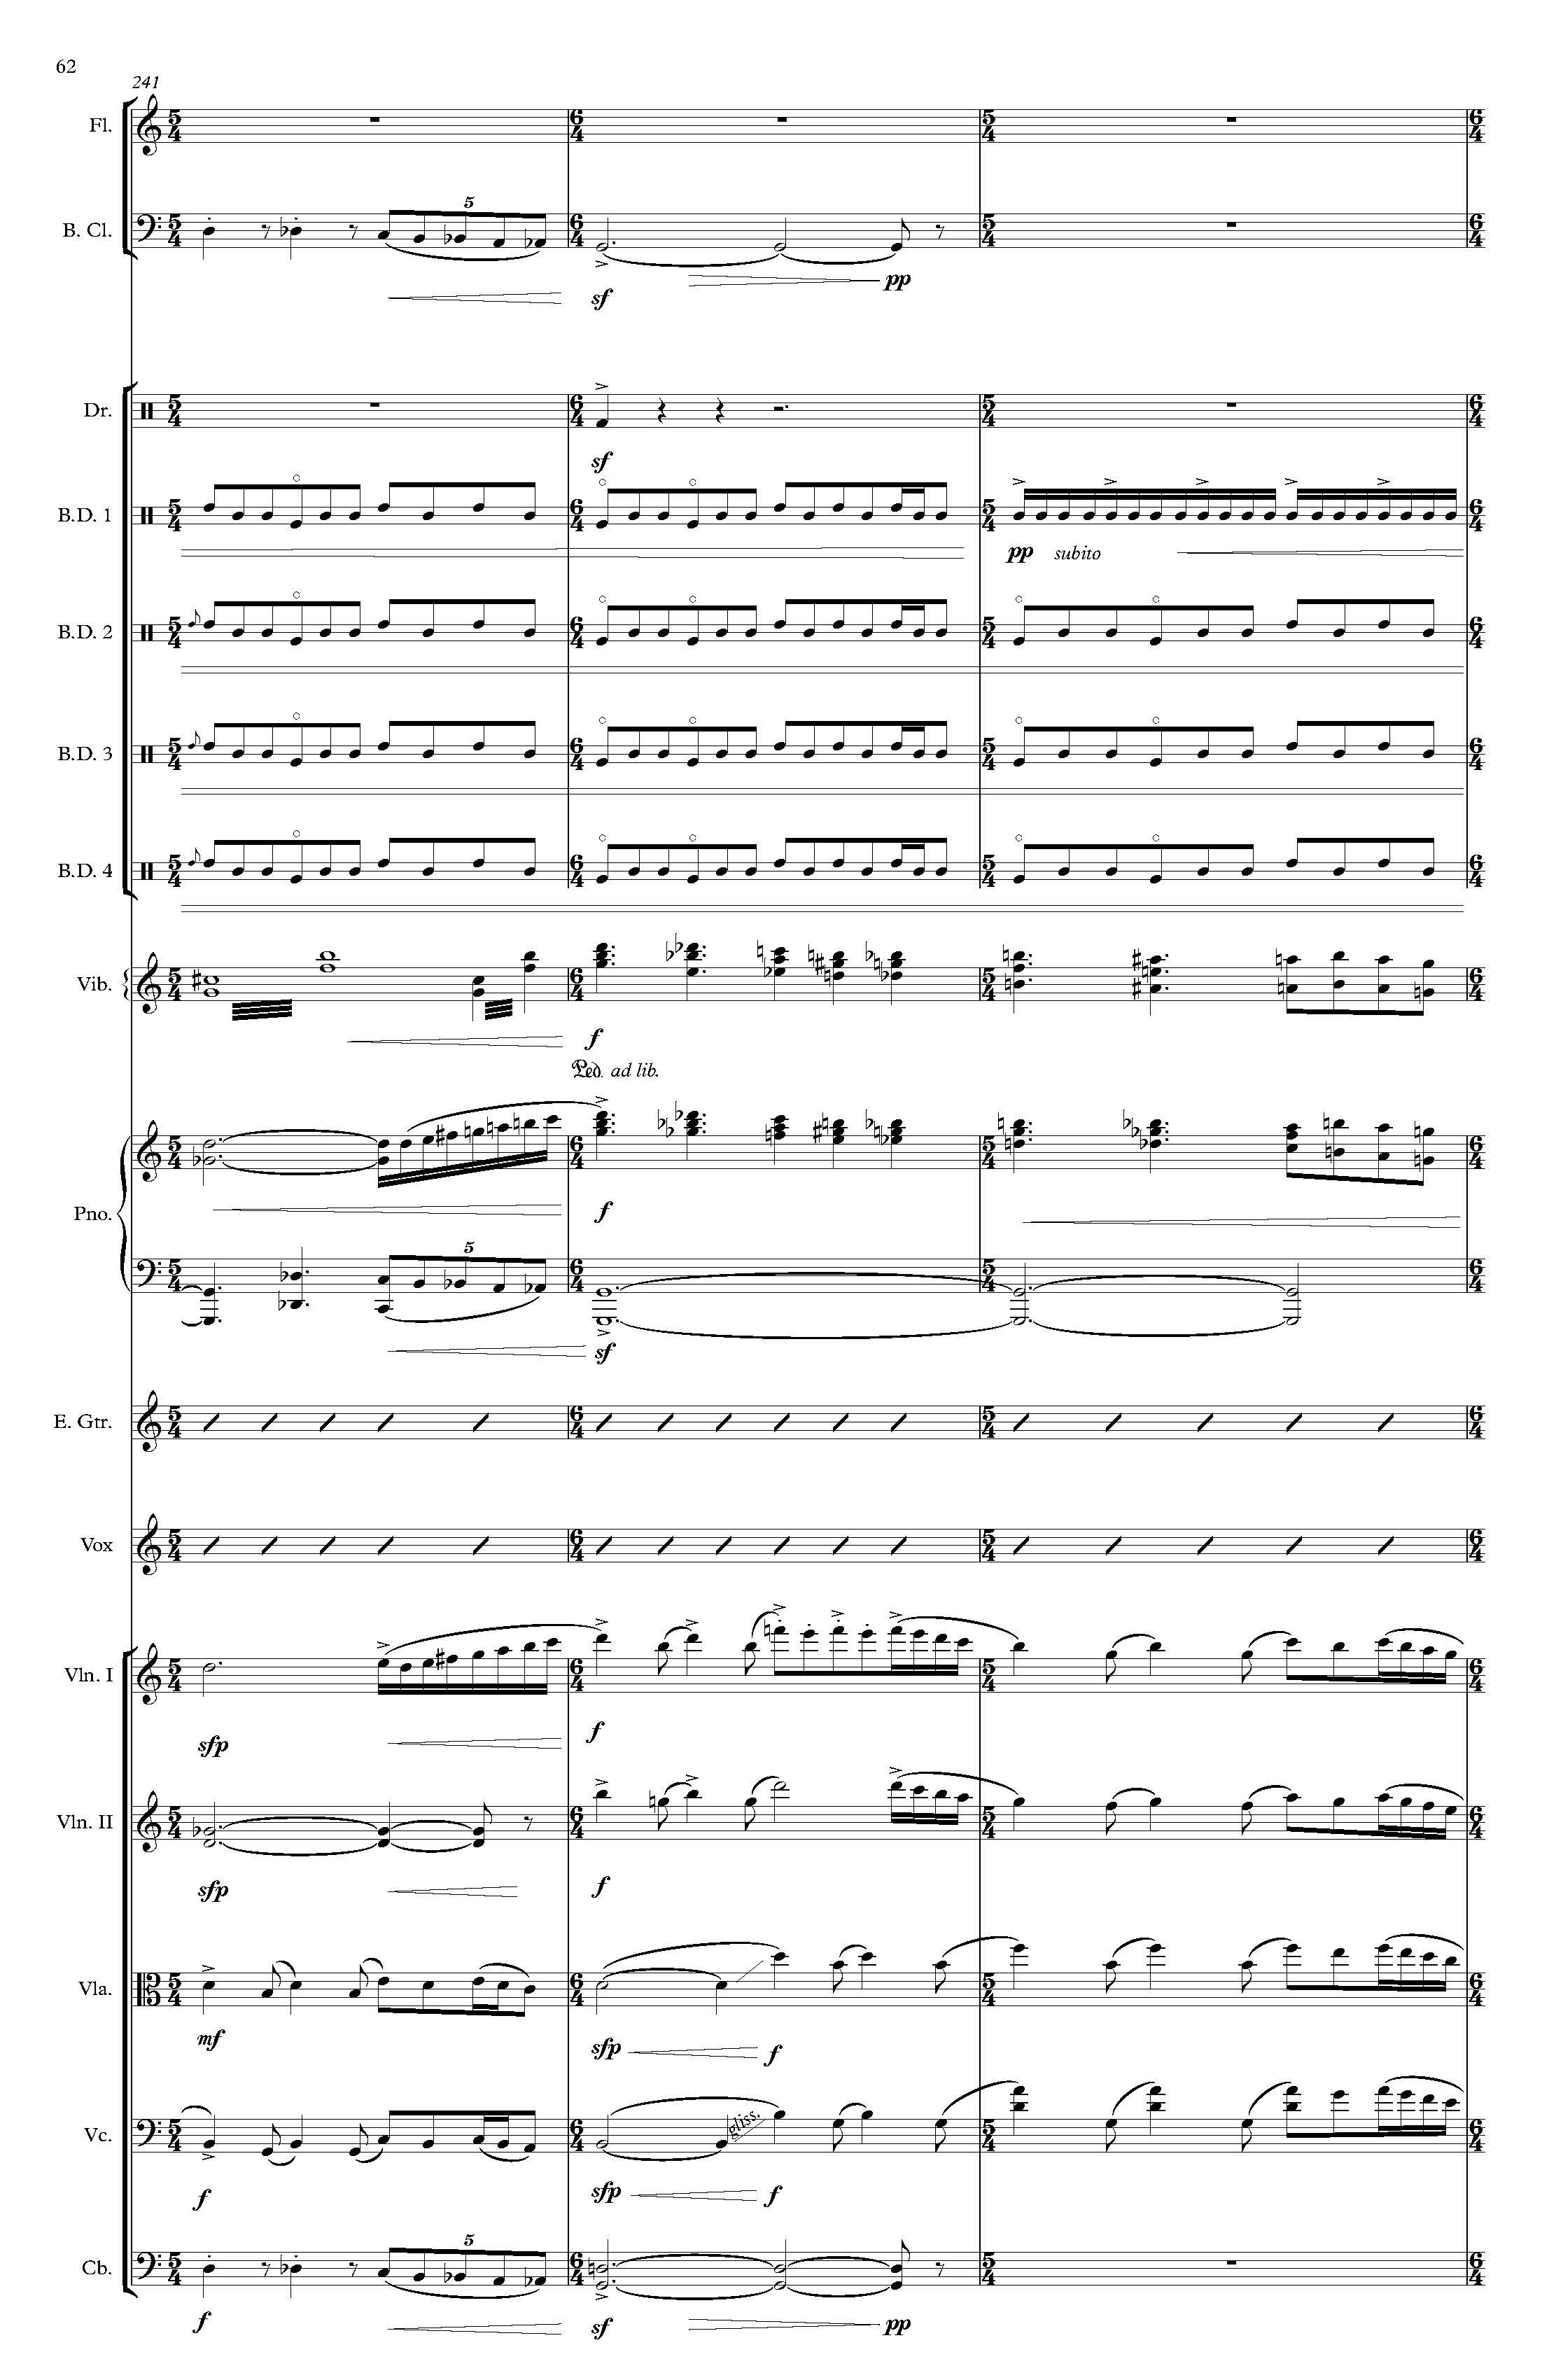 The Rembrandt of Avenue A - Complete Score_Page_68.jpg